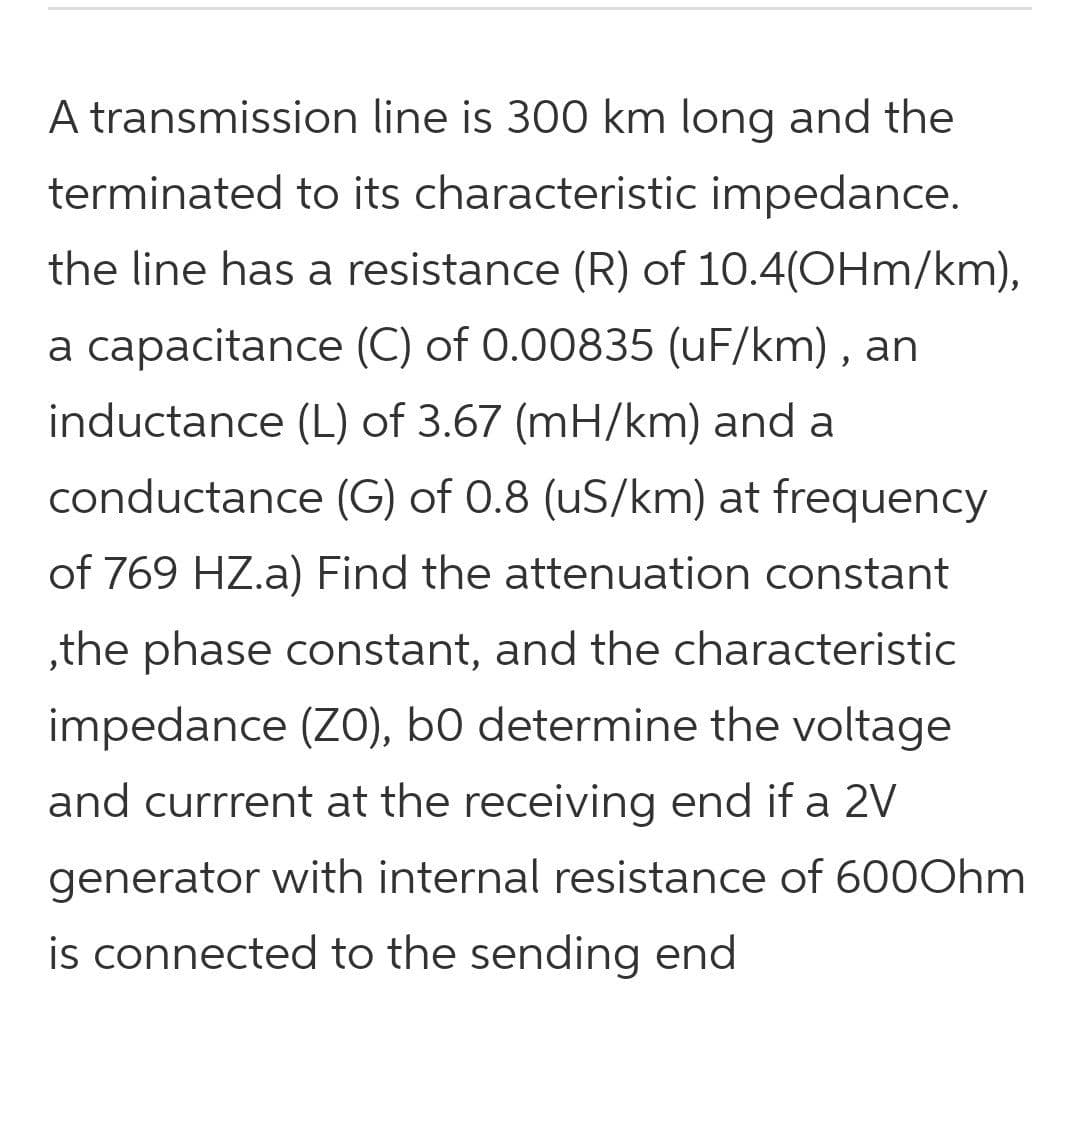 A transmission line is 300 km long and the
terminated to its characteristic impedance.
the line has a resistance (R) of 10.4(OHm/km),
a capacitance (C) of 0.00835 (uF/km) , an
inductance (L) of 3.67 (mH/km) and a
conductance (G) of 0.8 (uS/km) at frequency
of 769 HZ.a) Find the attenuation constant
,the phase constant, and the characteristic
impedance (ZO), b0 determine the voltage
and currrent at the receiving end if a 2V
generator with internal resistance of 60OOhm
is connected to the sending end
